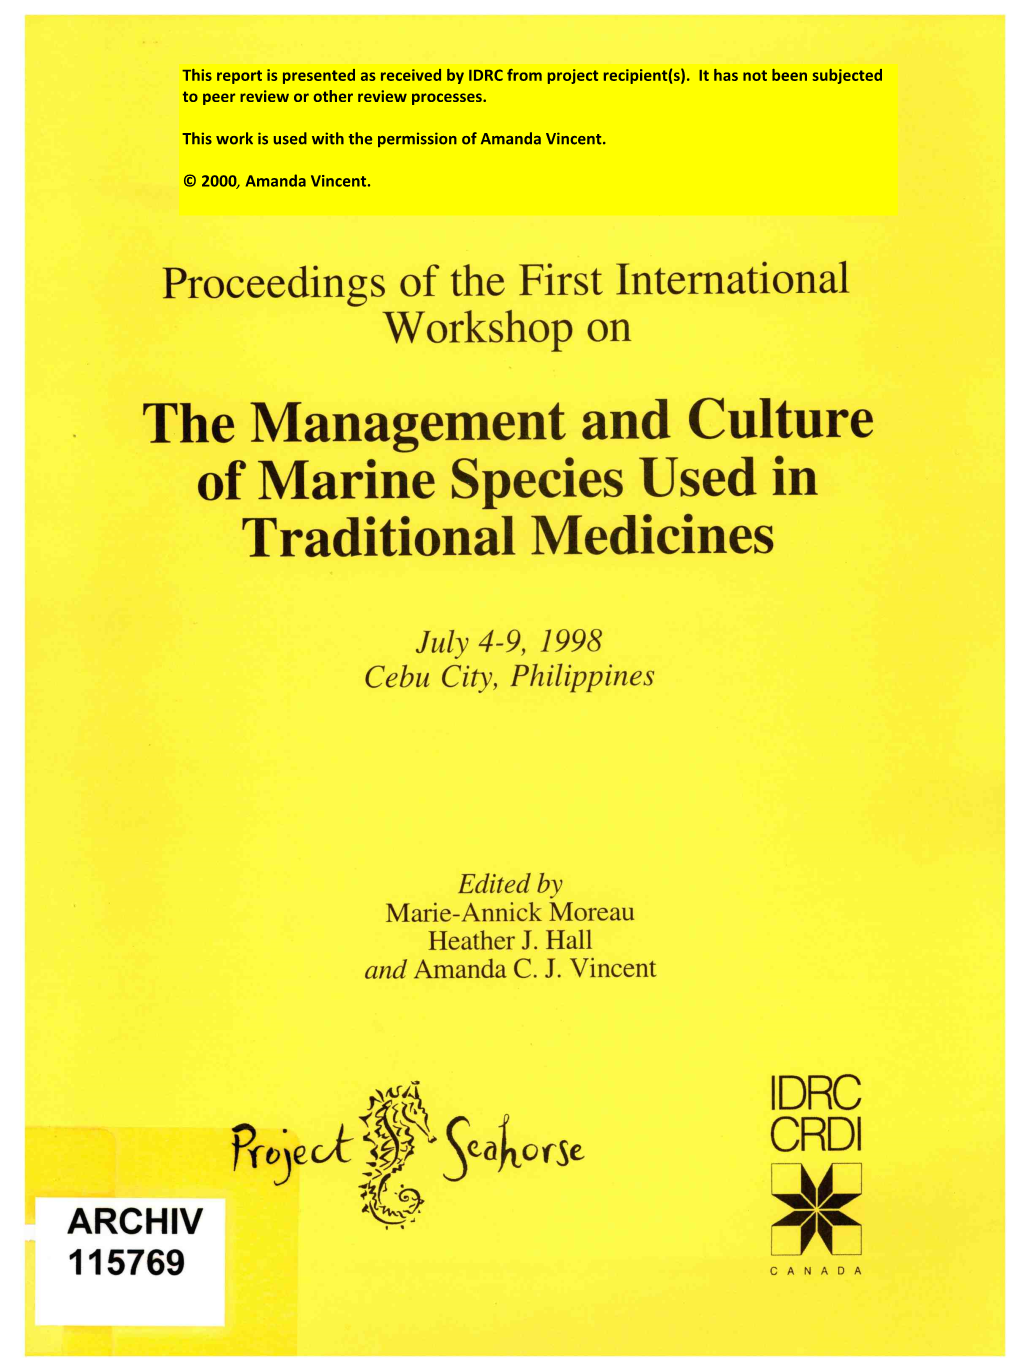 Proceedings of the First International Workshop on the Management and Culture of Marine Species Used in Traditional Medicines